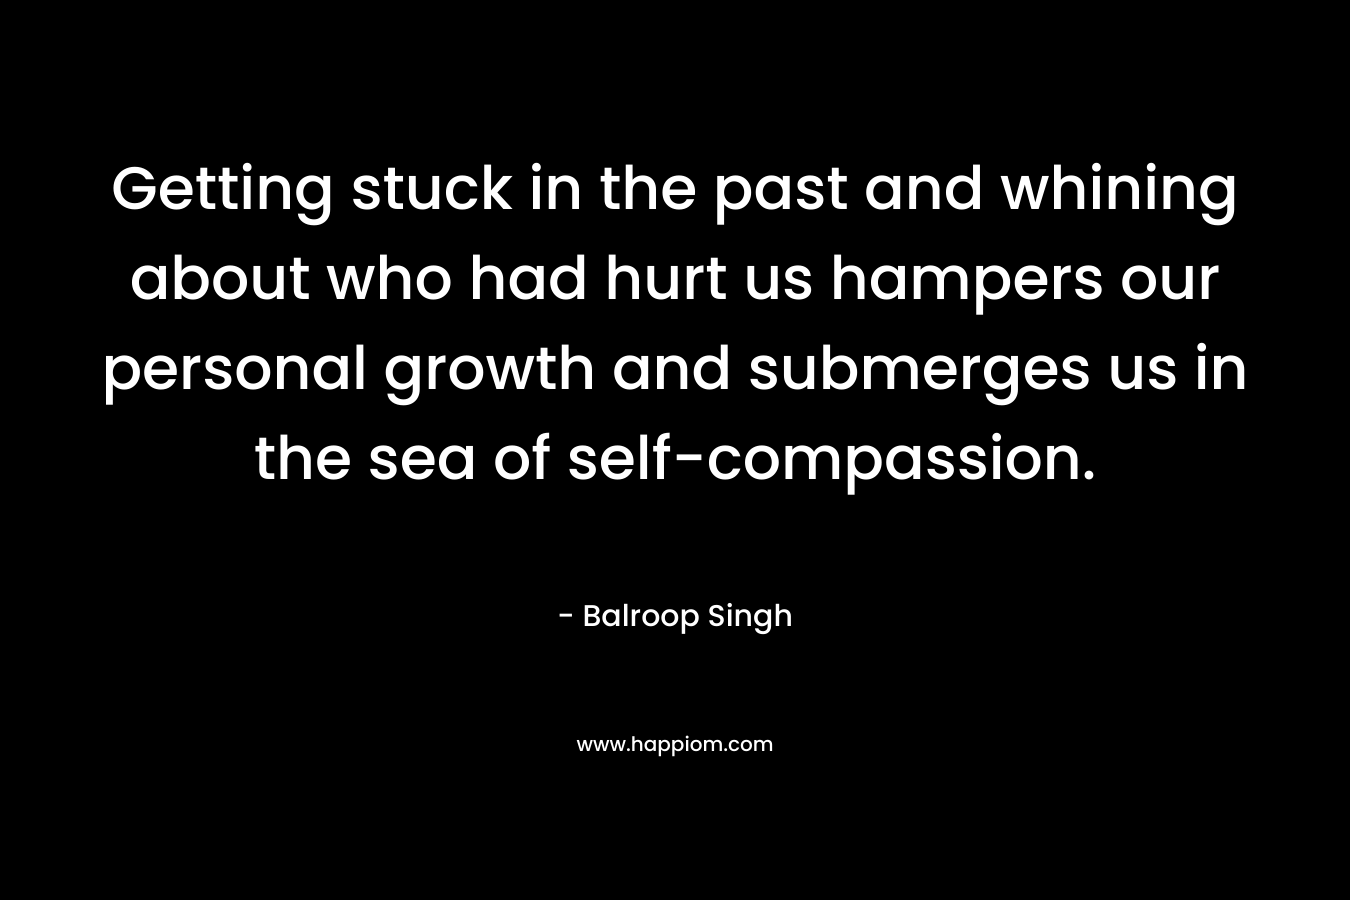 Getting stuck in the past and whining about who had hurt us hampers our personal growth and submerges us in the sea of self-compassion.